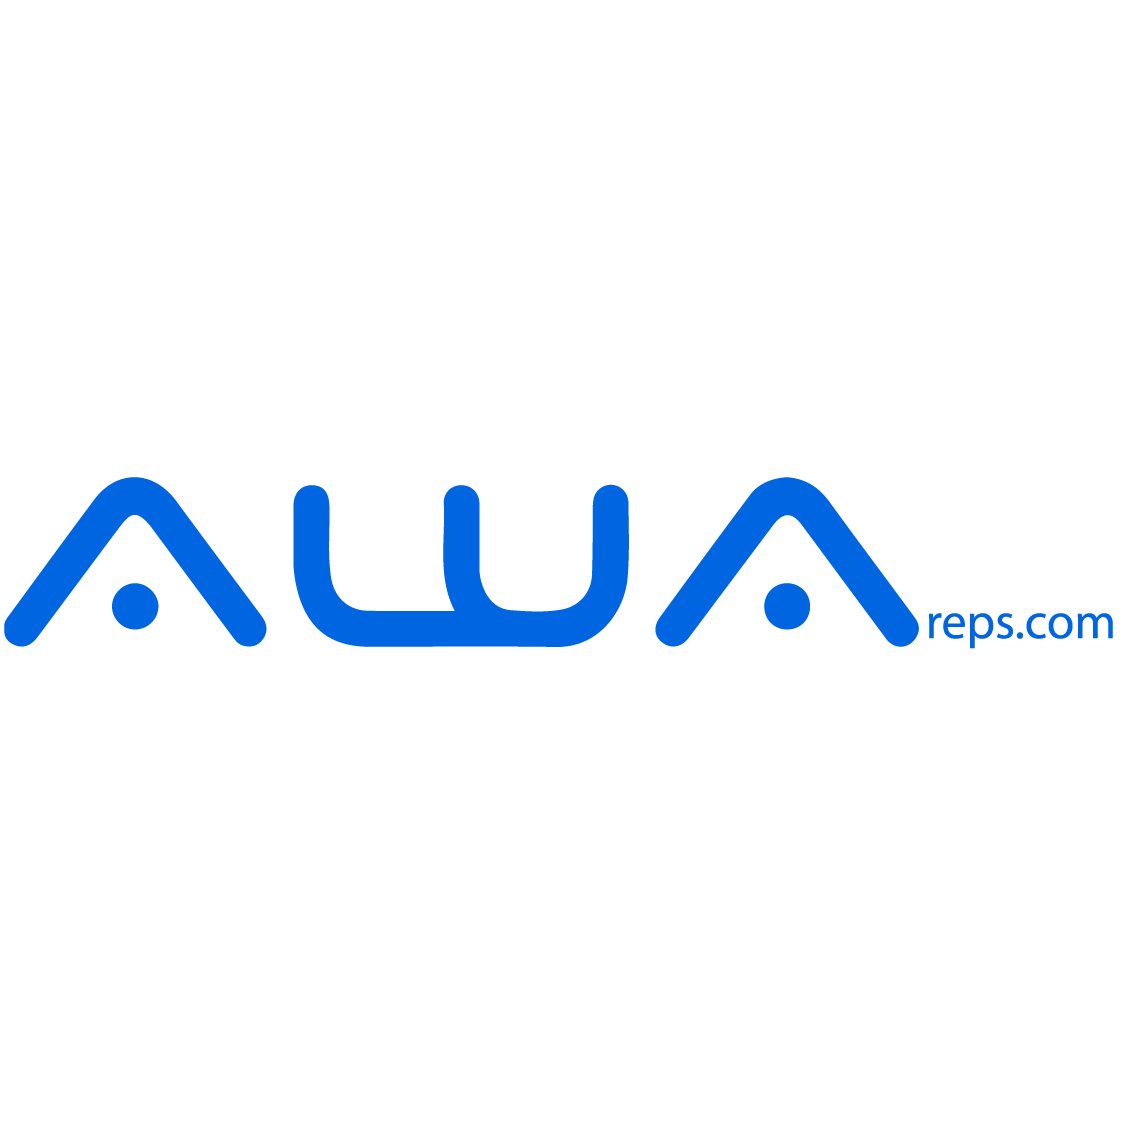 AWA Reps is a Manufacturers Representative Firm in the electronic security industry.